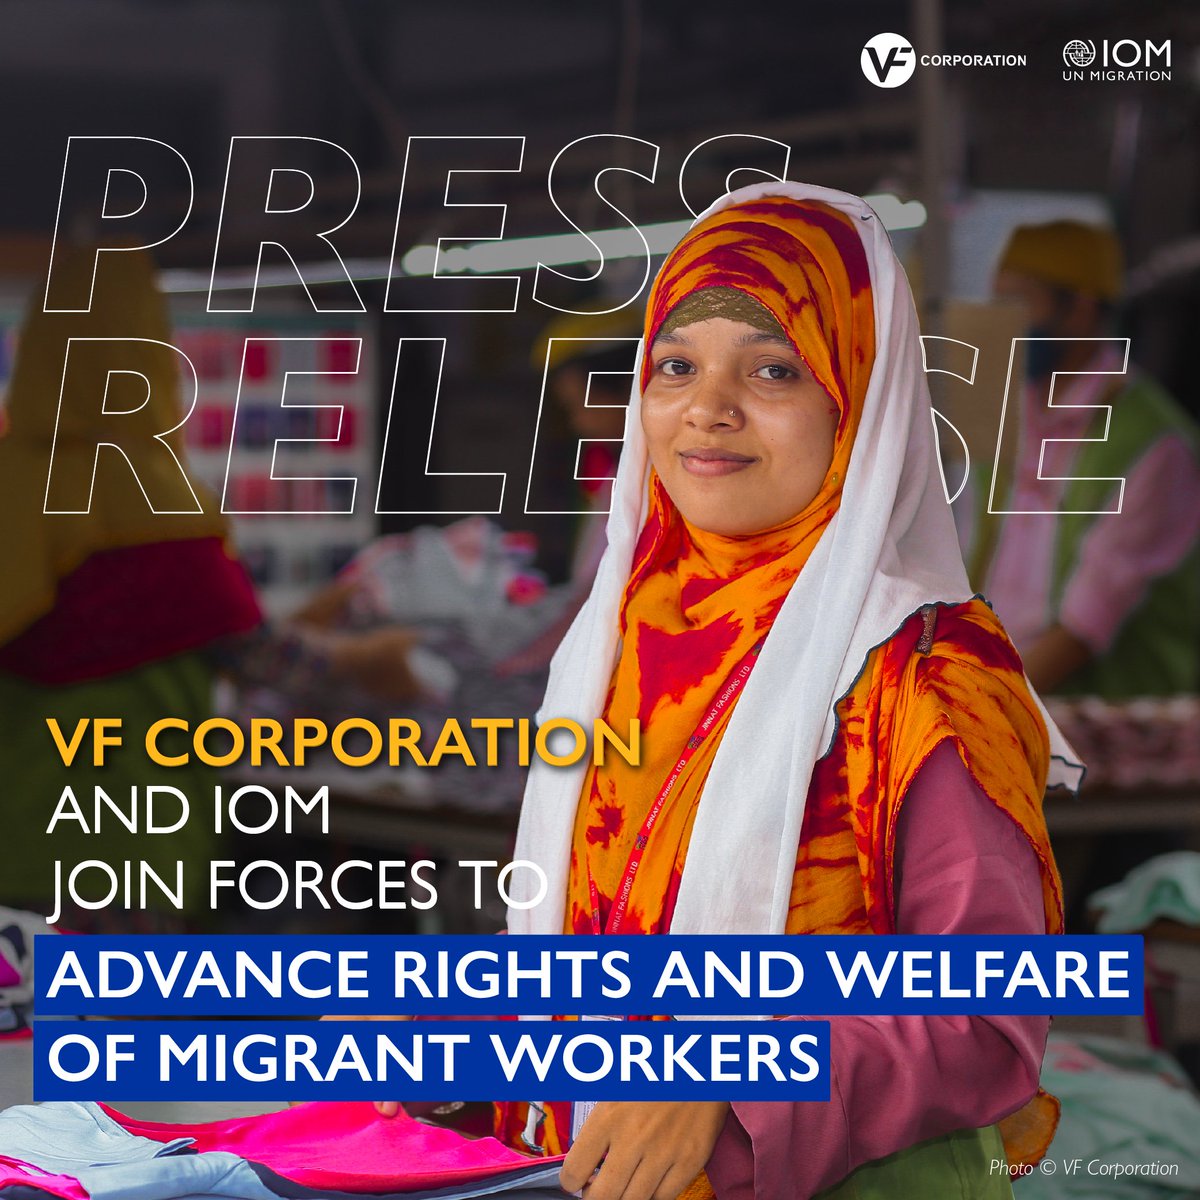 VF Corporation, a global leader in apparel & footwear brands, has joined forces with IOM to advance the rights & welfare of migrants employed across their global supply chains. 📰Read more at bit.ly/3WeITyp